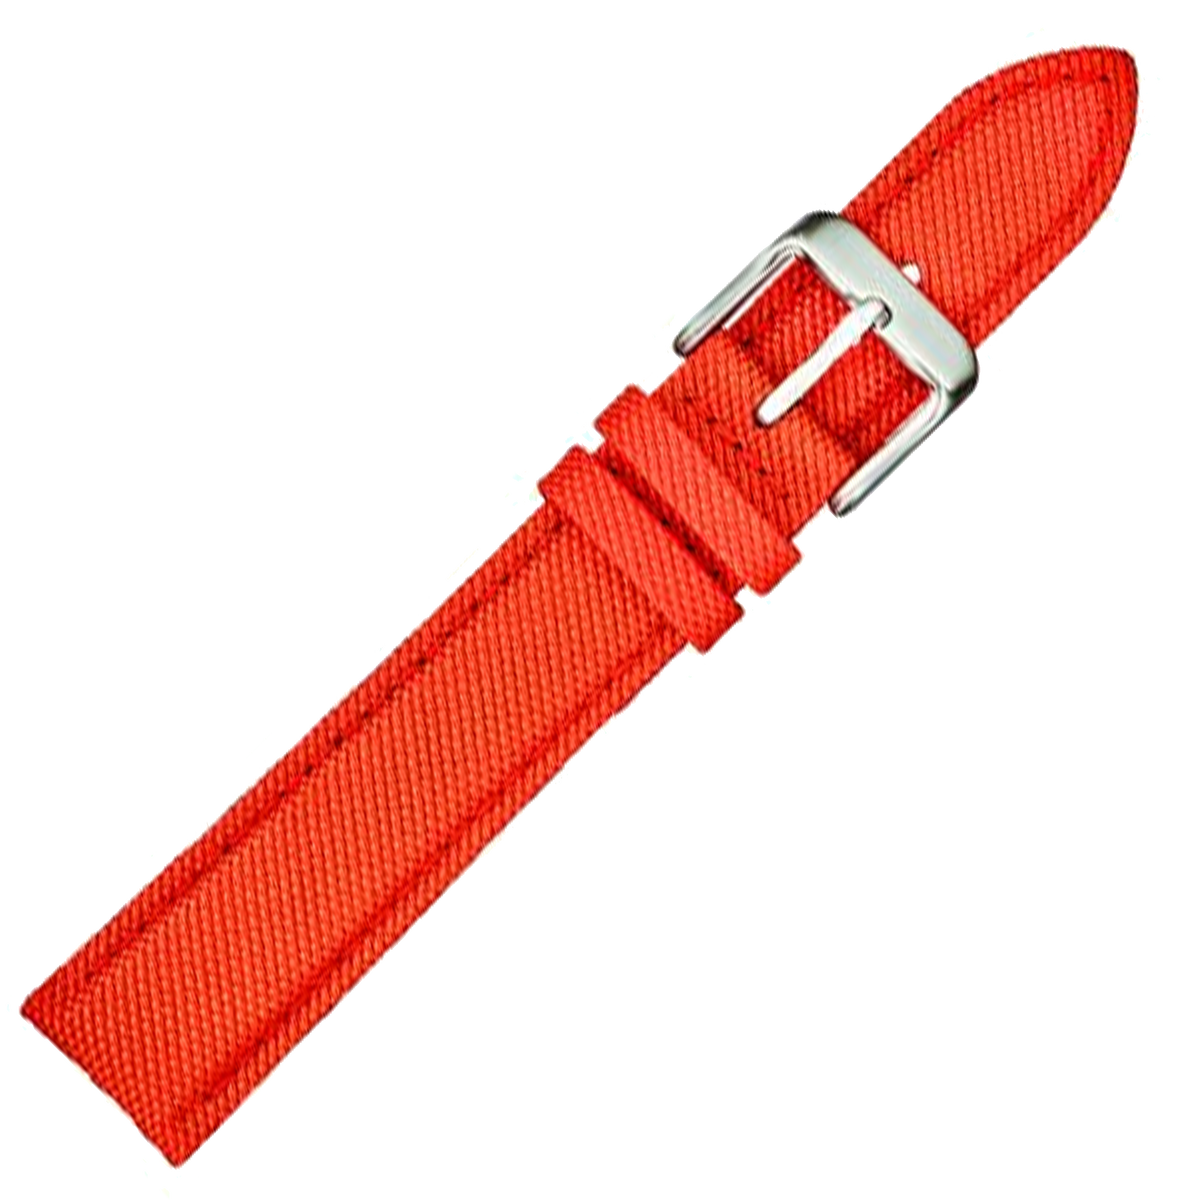 Alpine Watchstrap - Cordura Fabric with WR Leather